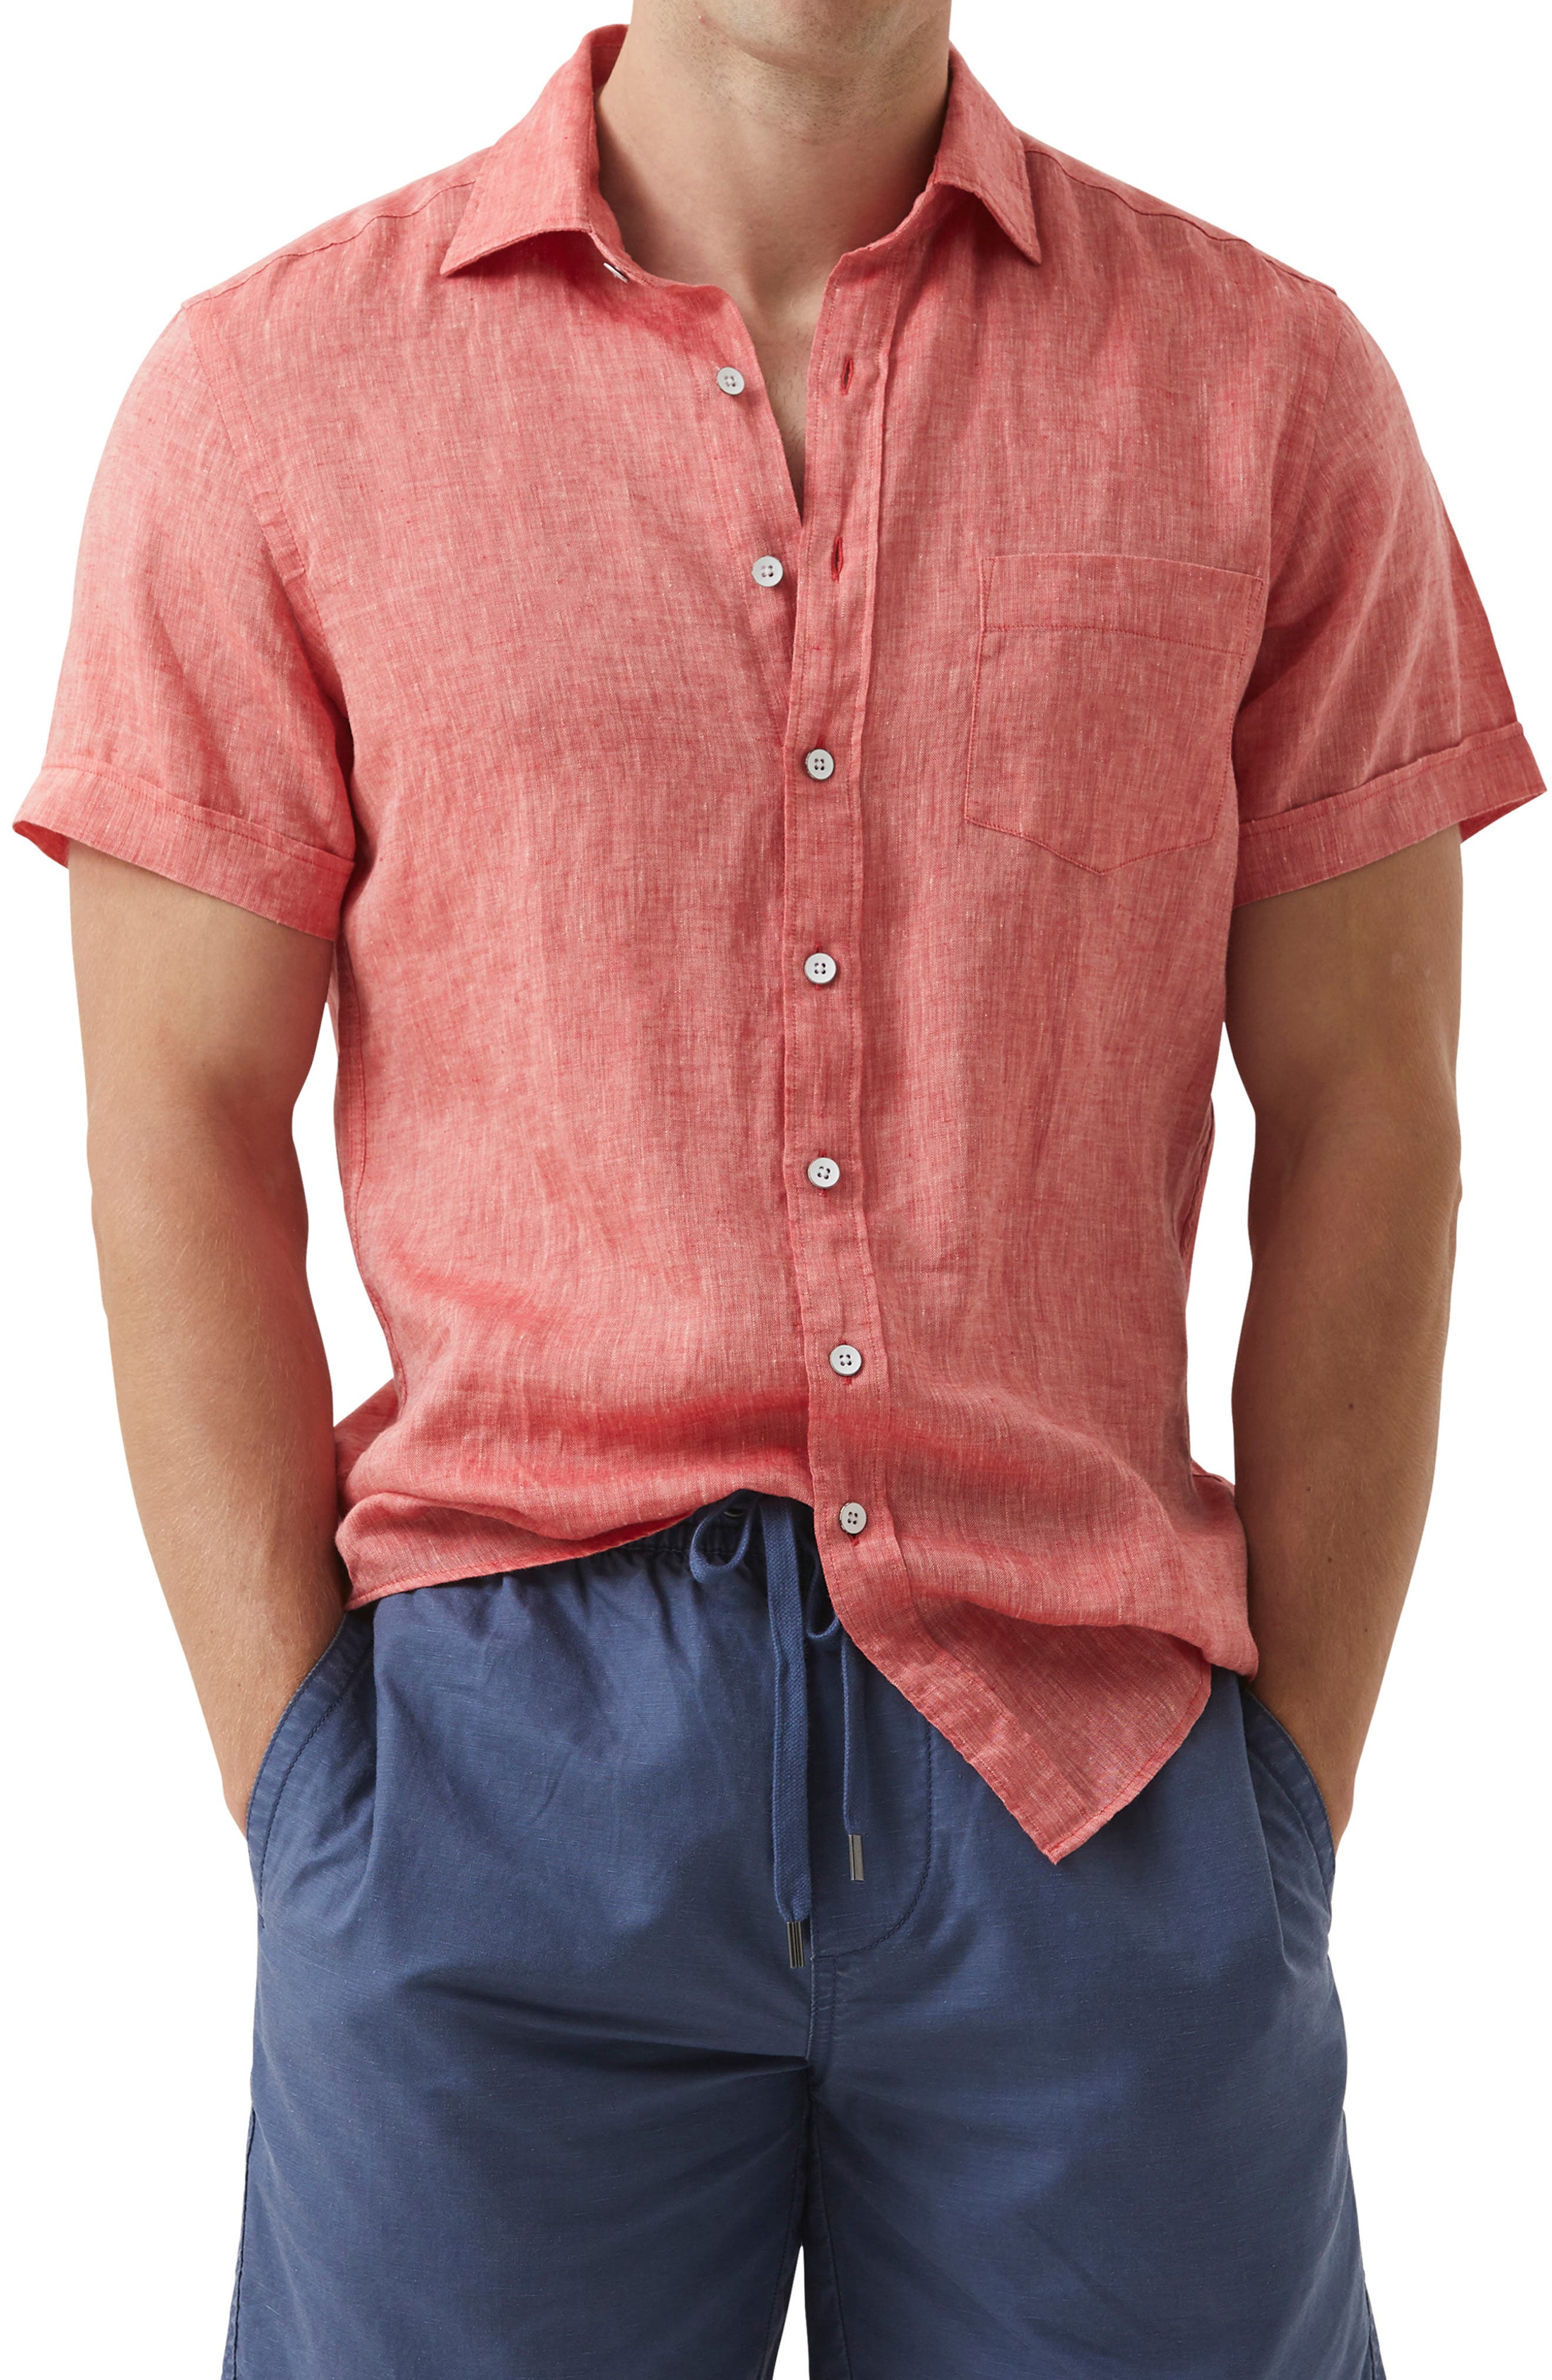 Men's Red Button Up Shirts | Nordstrom